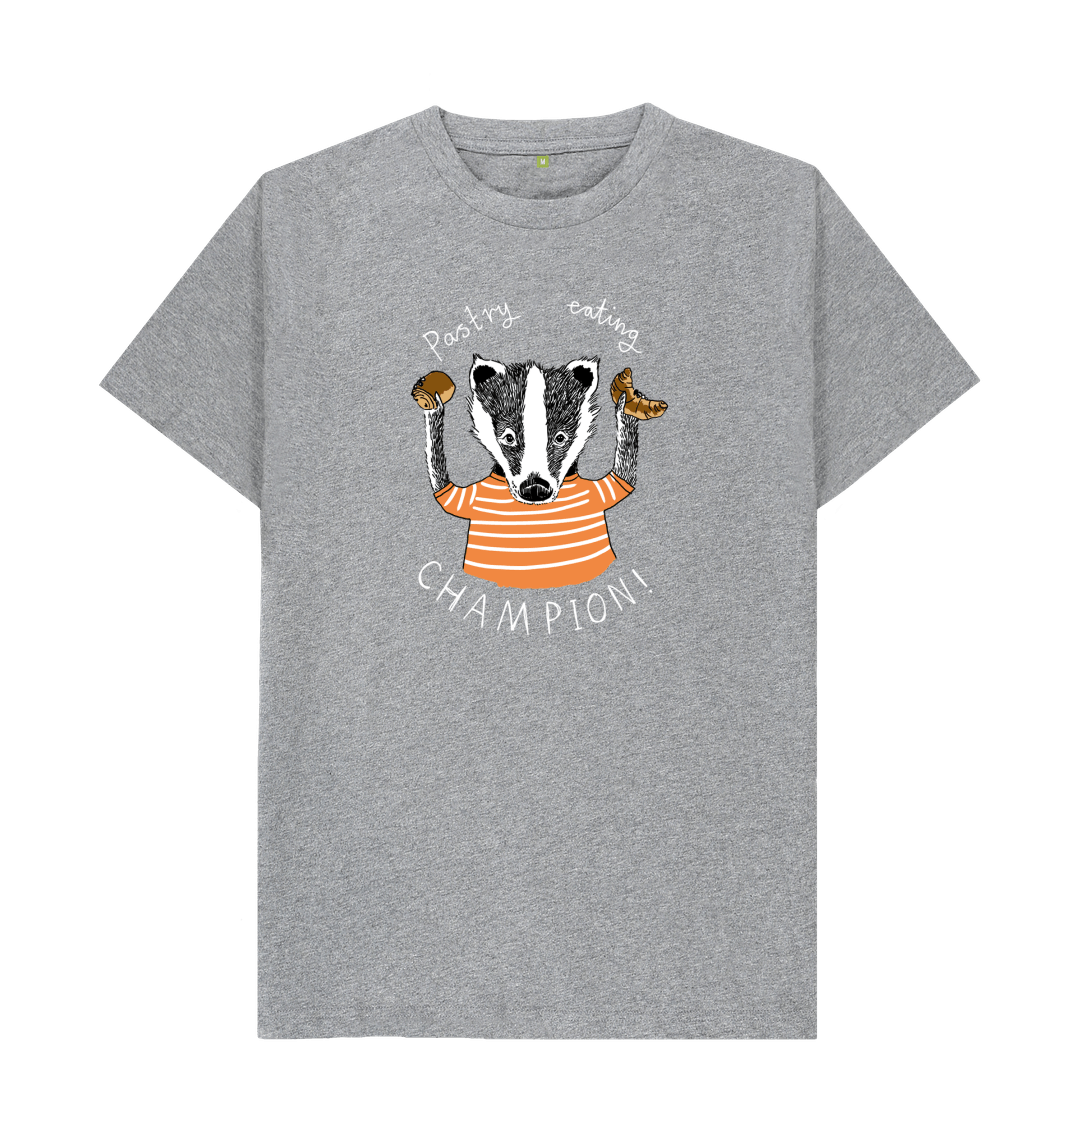 Athletic Grey 'Pastry Eating Champion!' Men's T-shirt